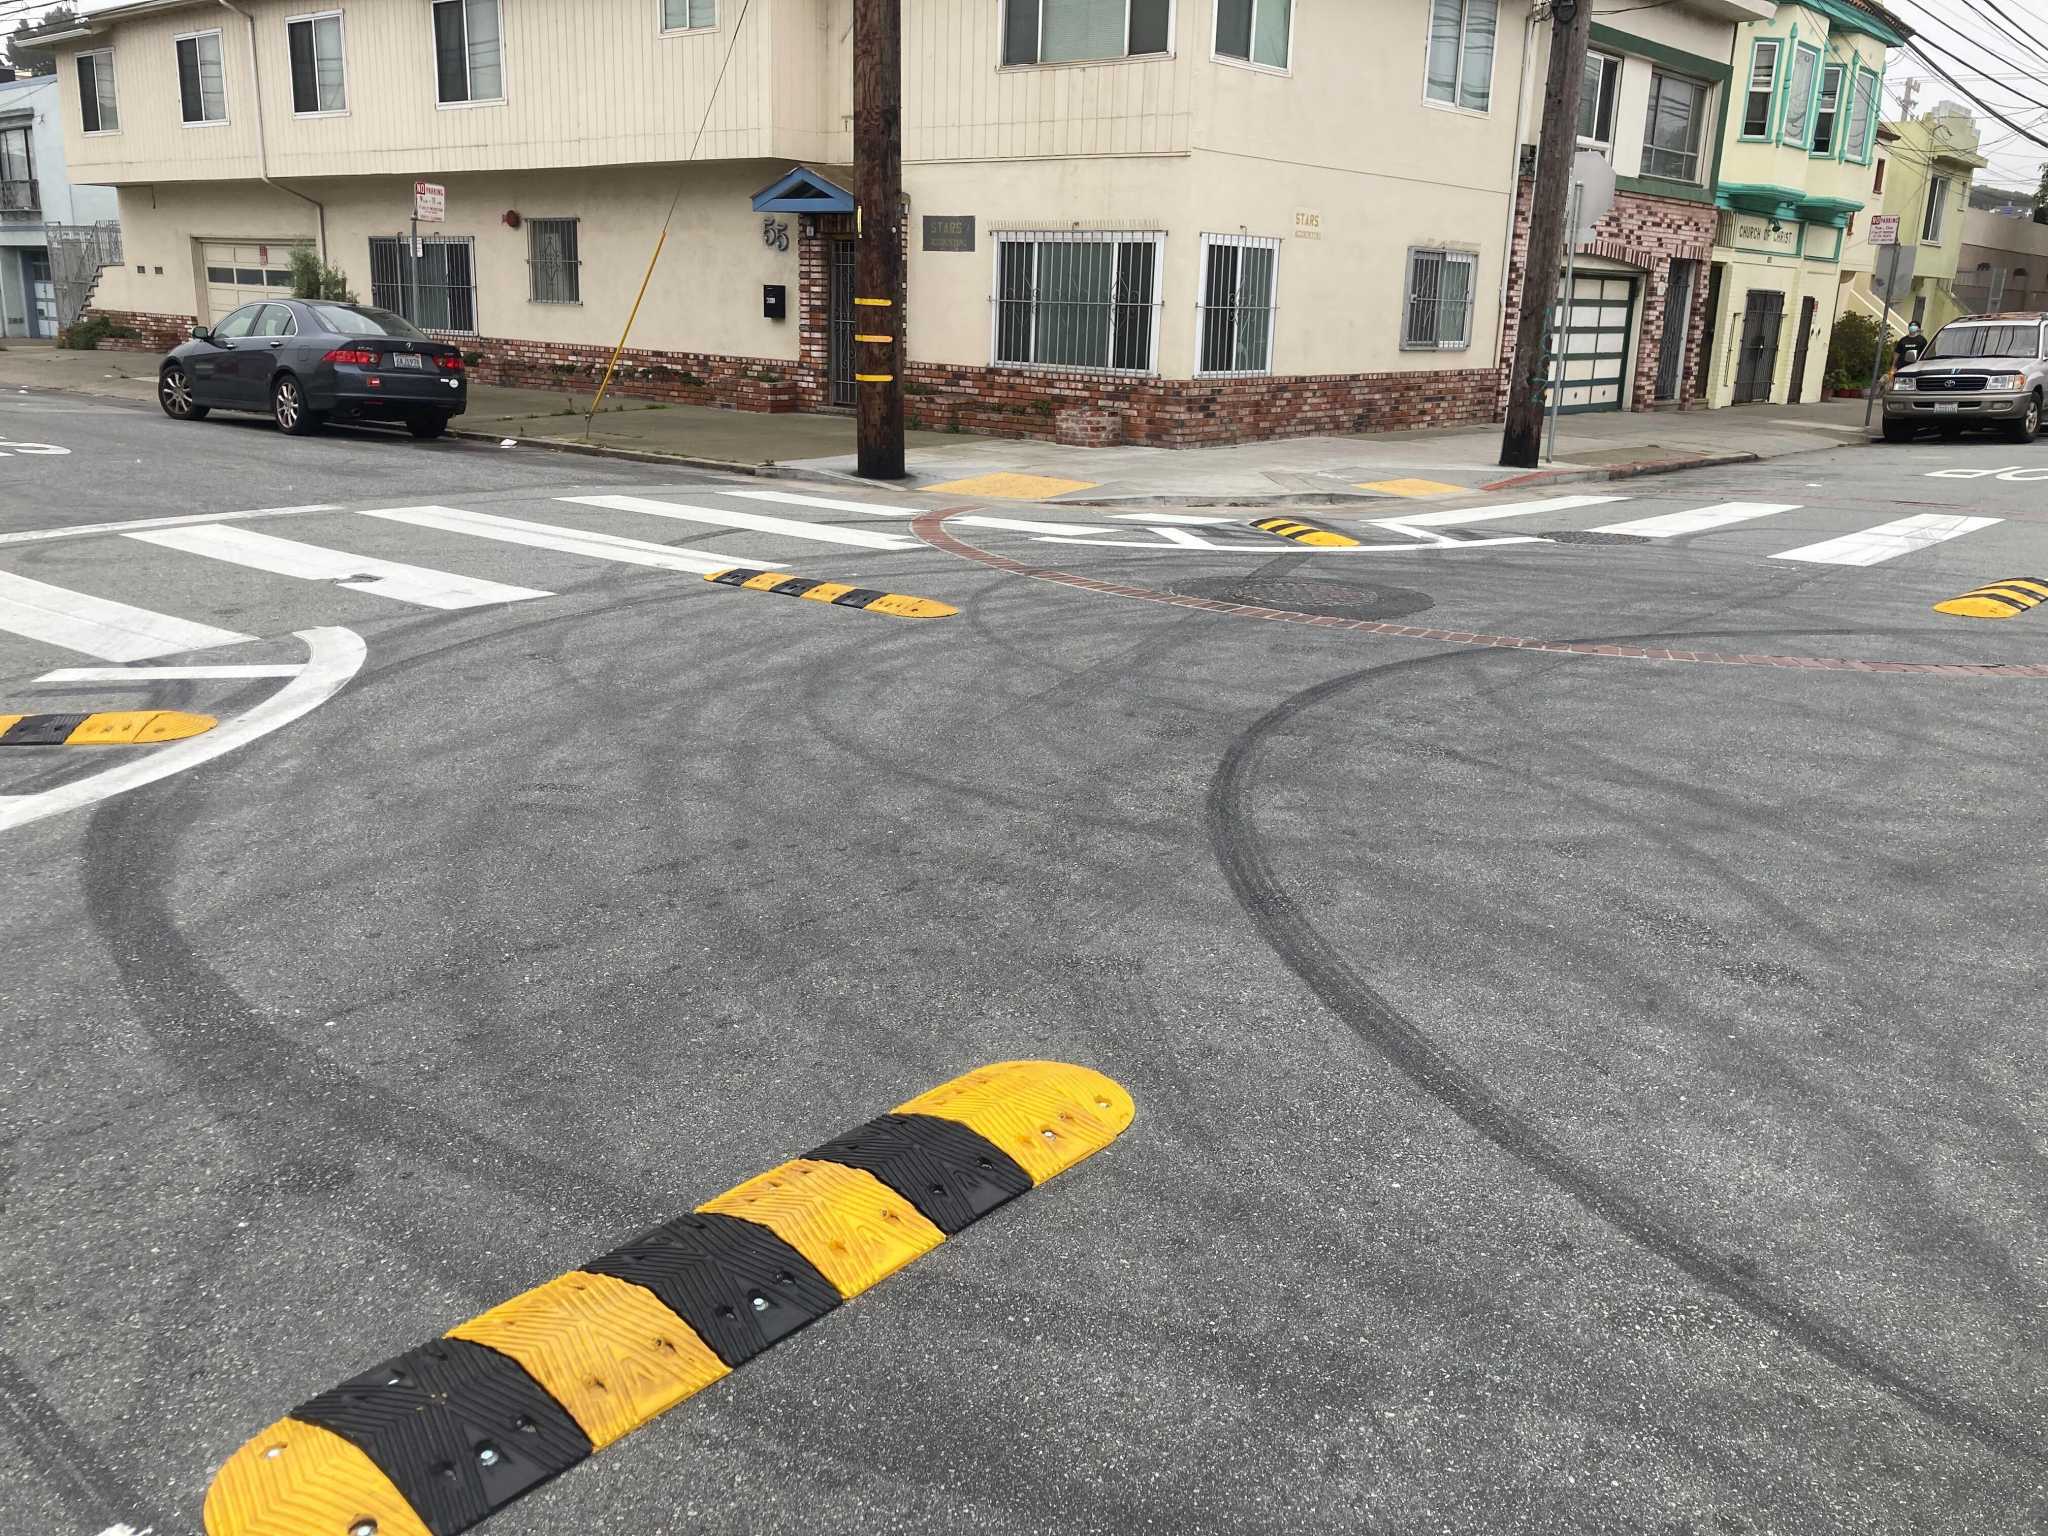 This S.F. intersection got some unusual speed bumps. Here's what